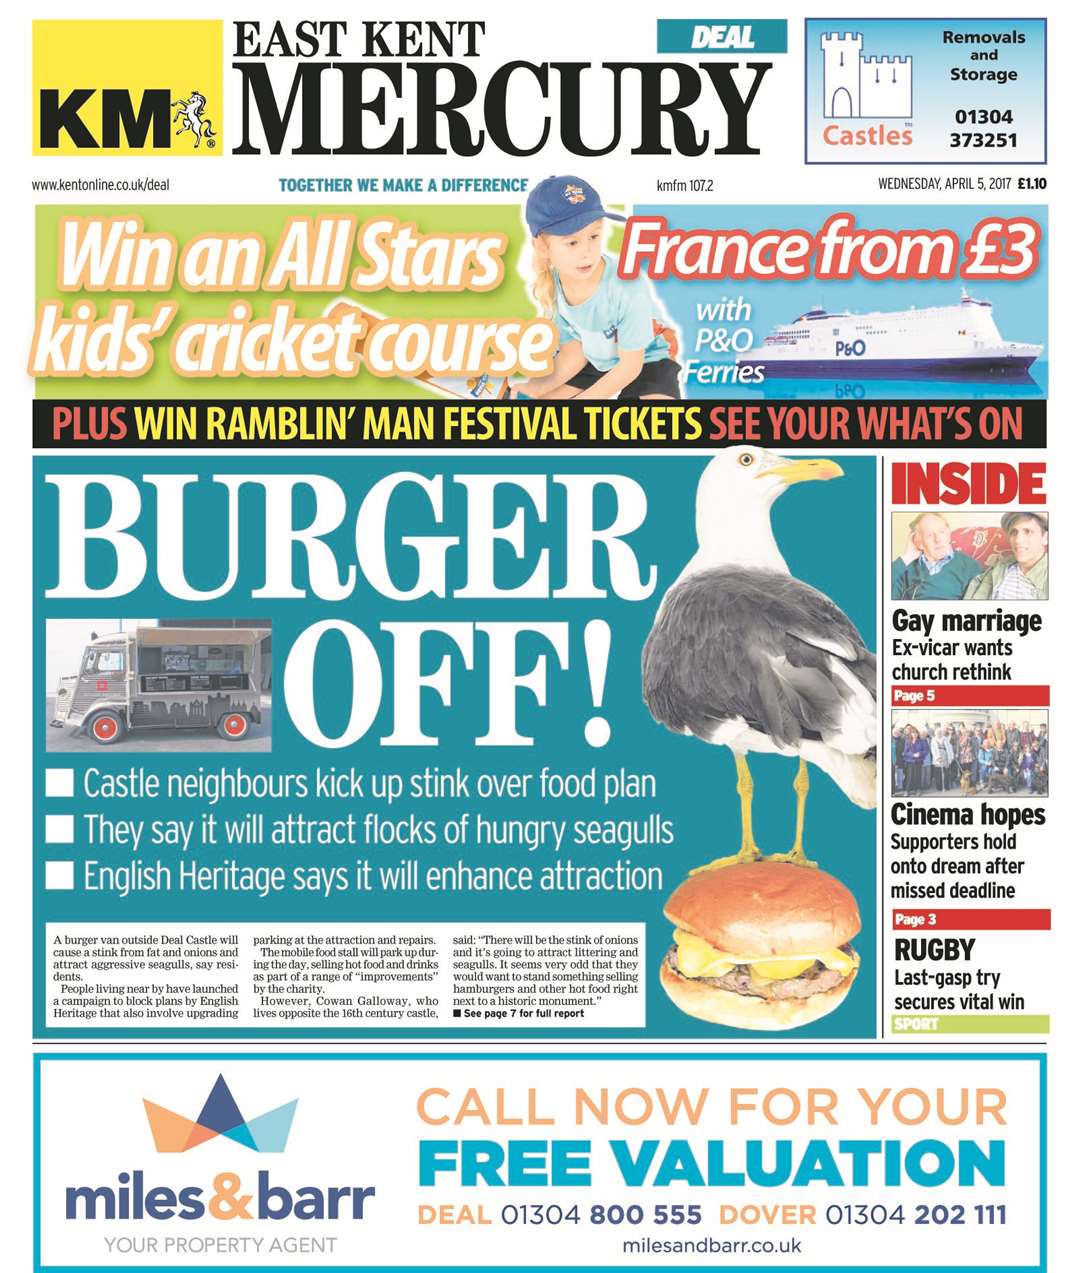 The East Kent Mercury front page on Wednesday, April 5, 2017